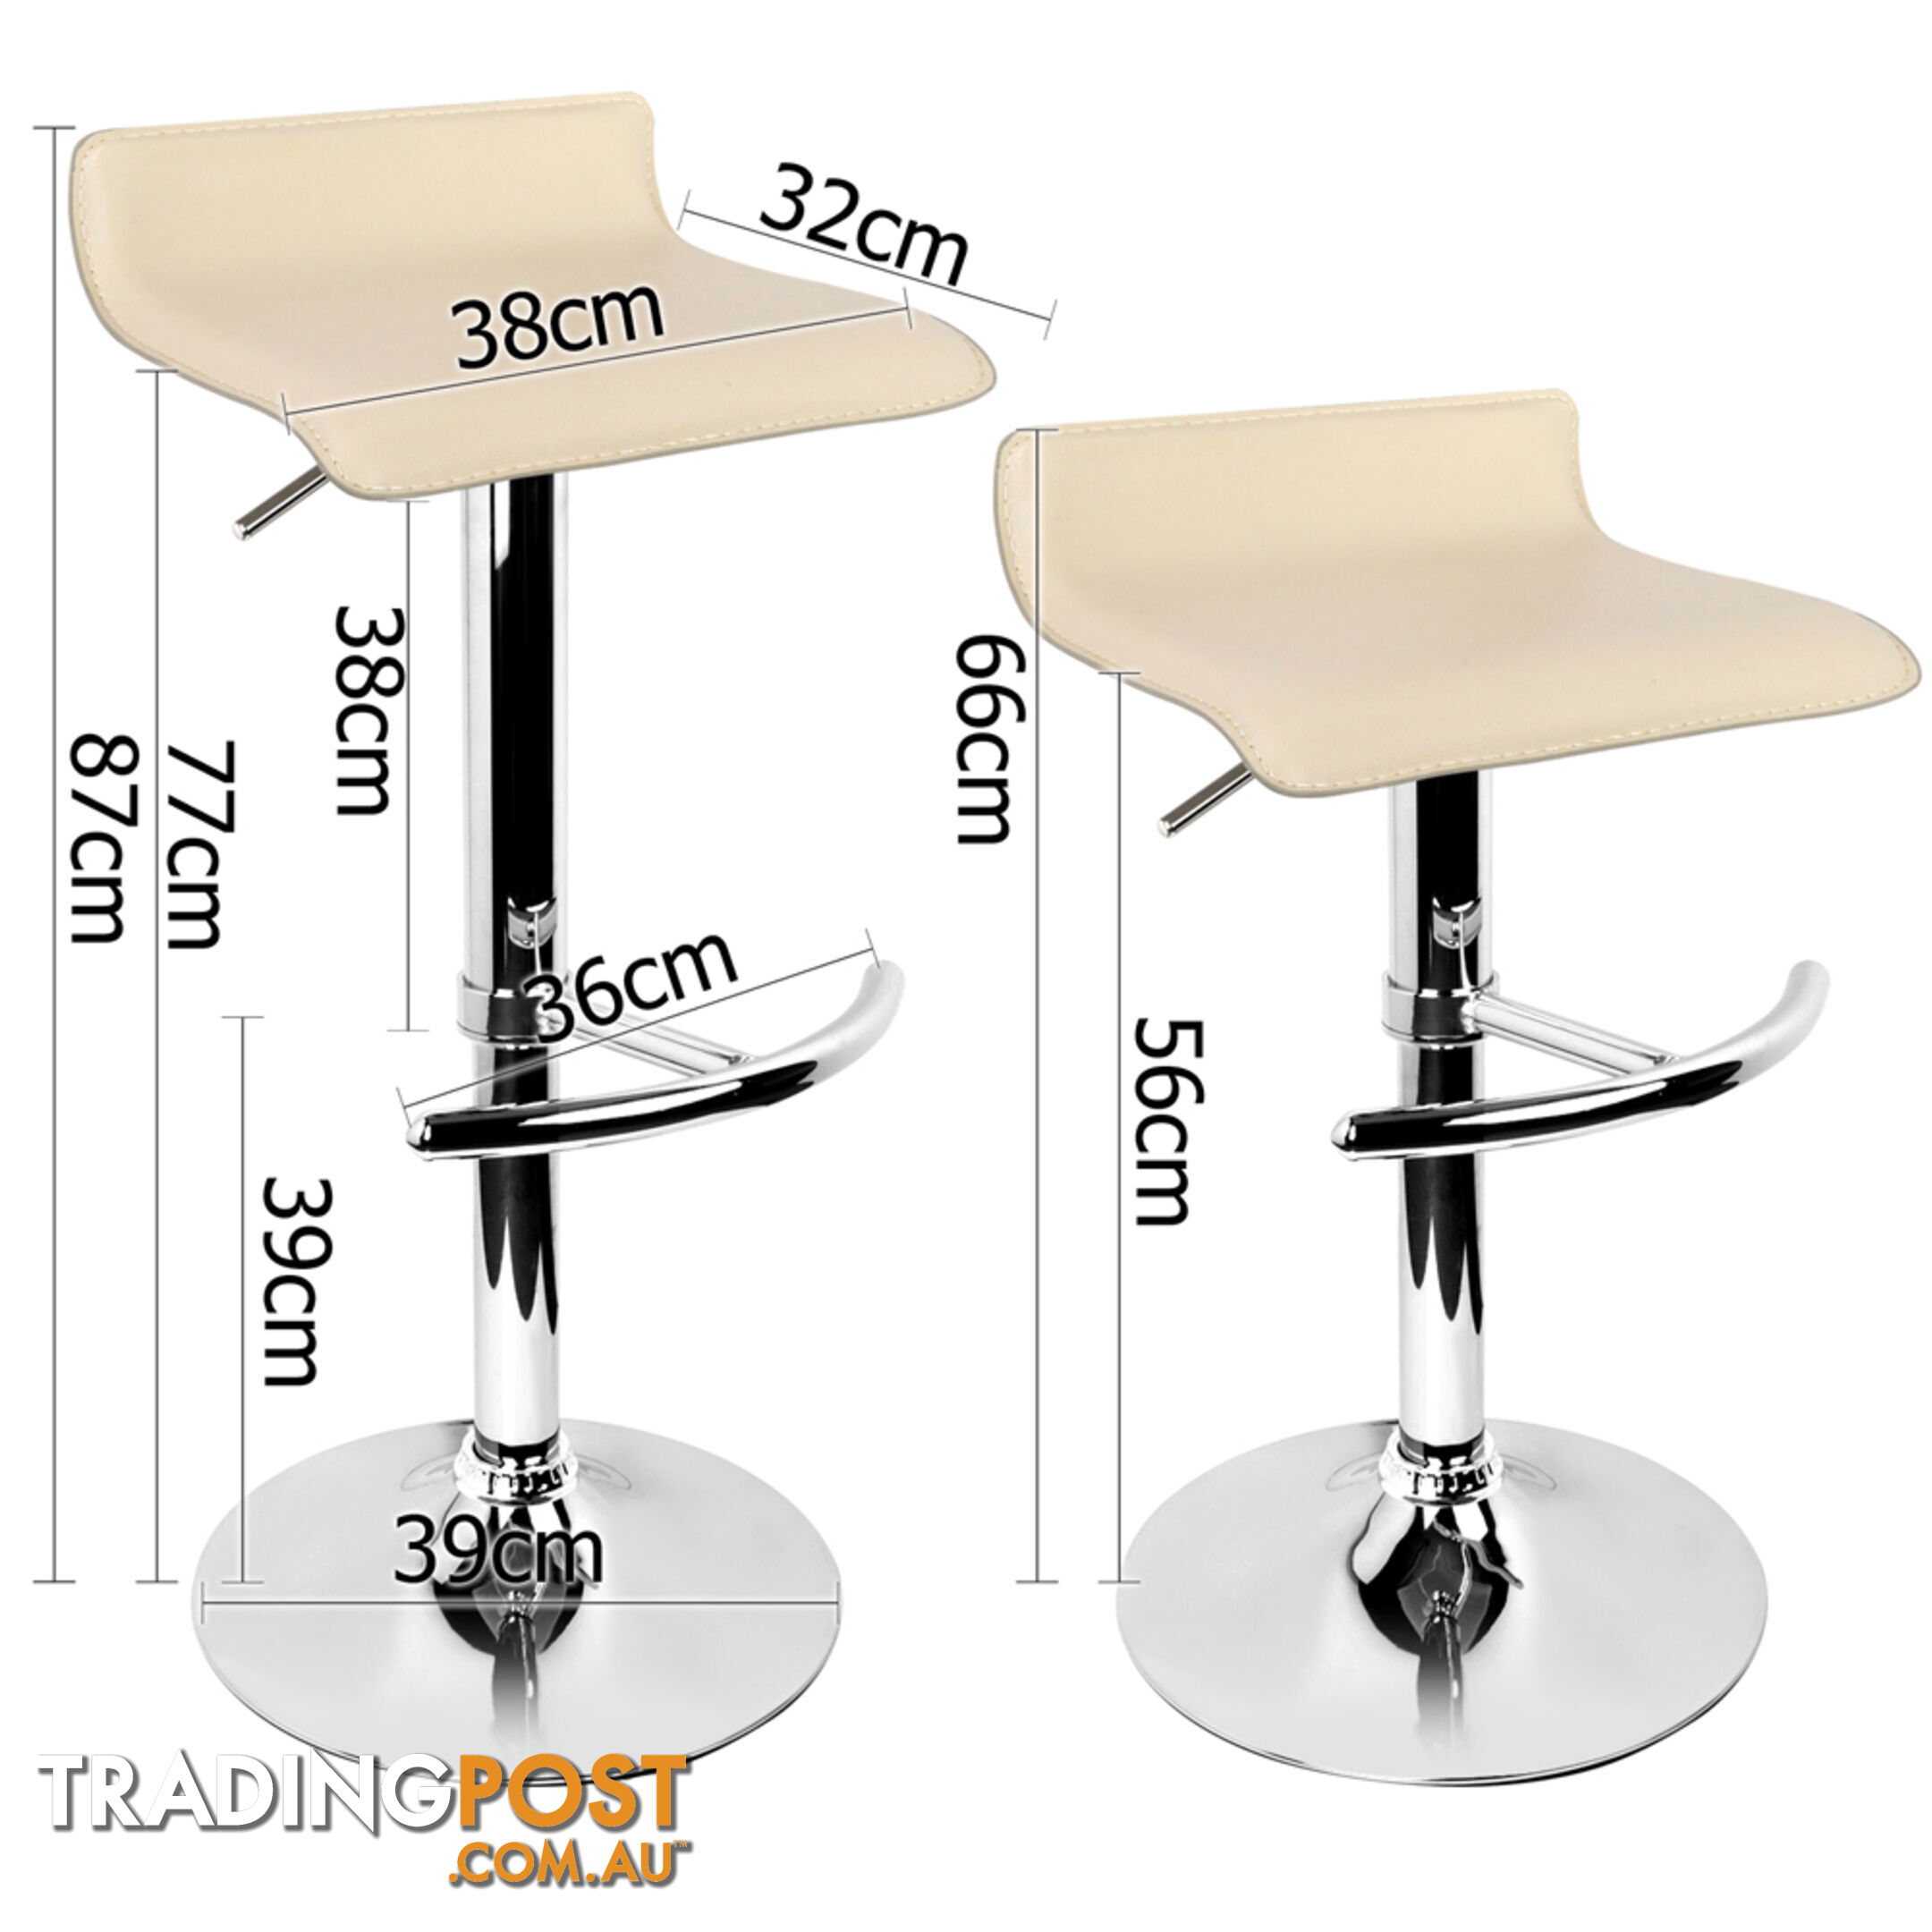 2 x PVC Leather Bar Stool Kitchen Counter Gas Lift Chair Cafe Swivel Stool Beige